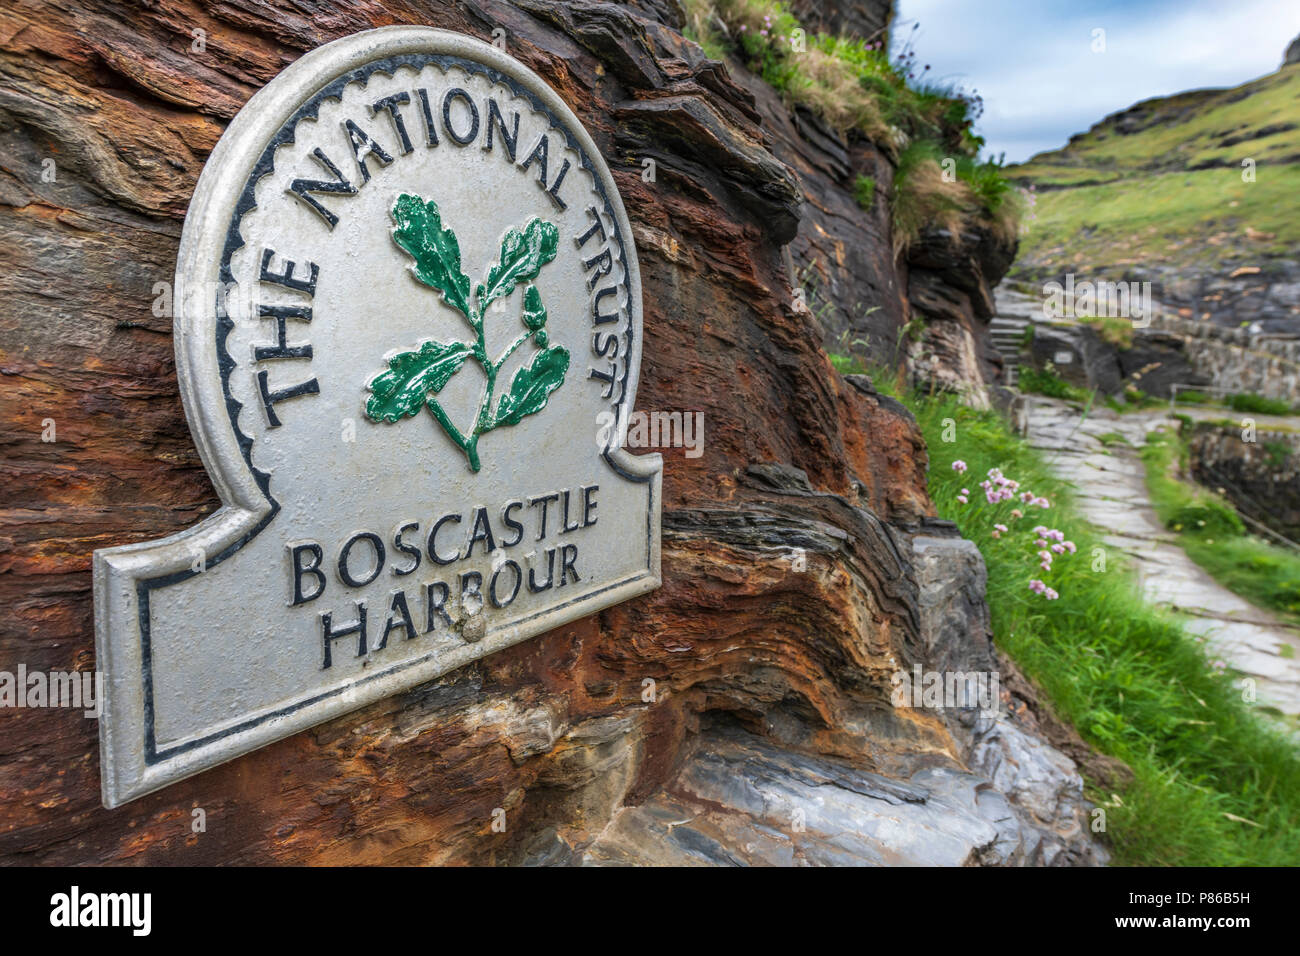 Boscastle Harbour, the scene of destructive flooding in 2004, now rebuilt and a thriving tourist destination in North Cornwall. Stock Photo